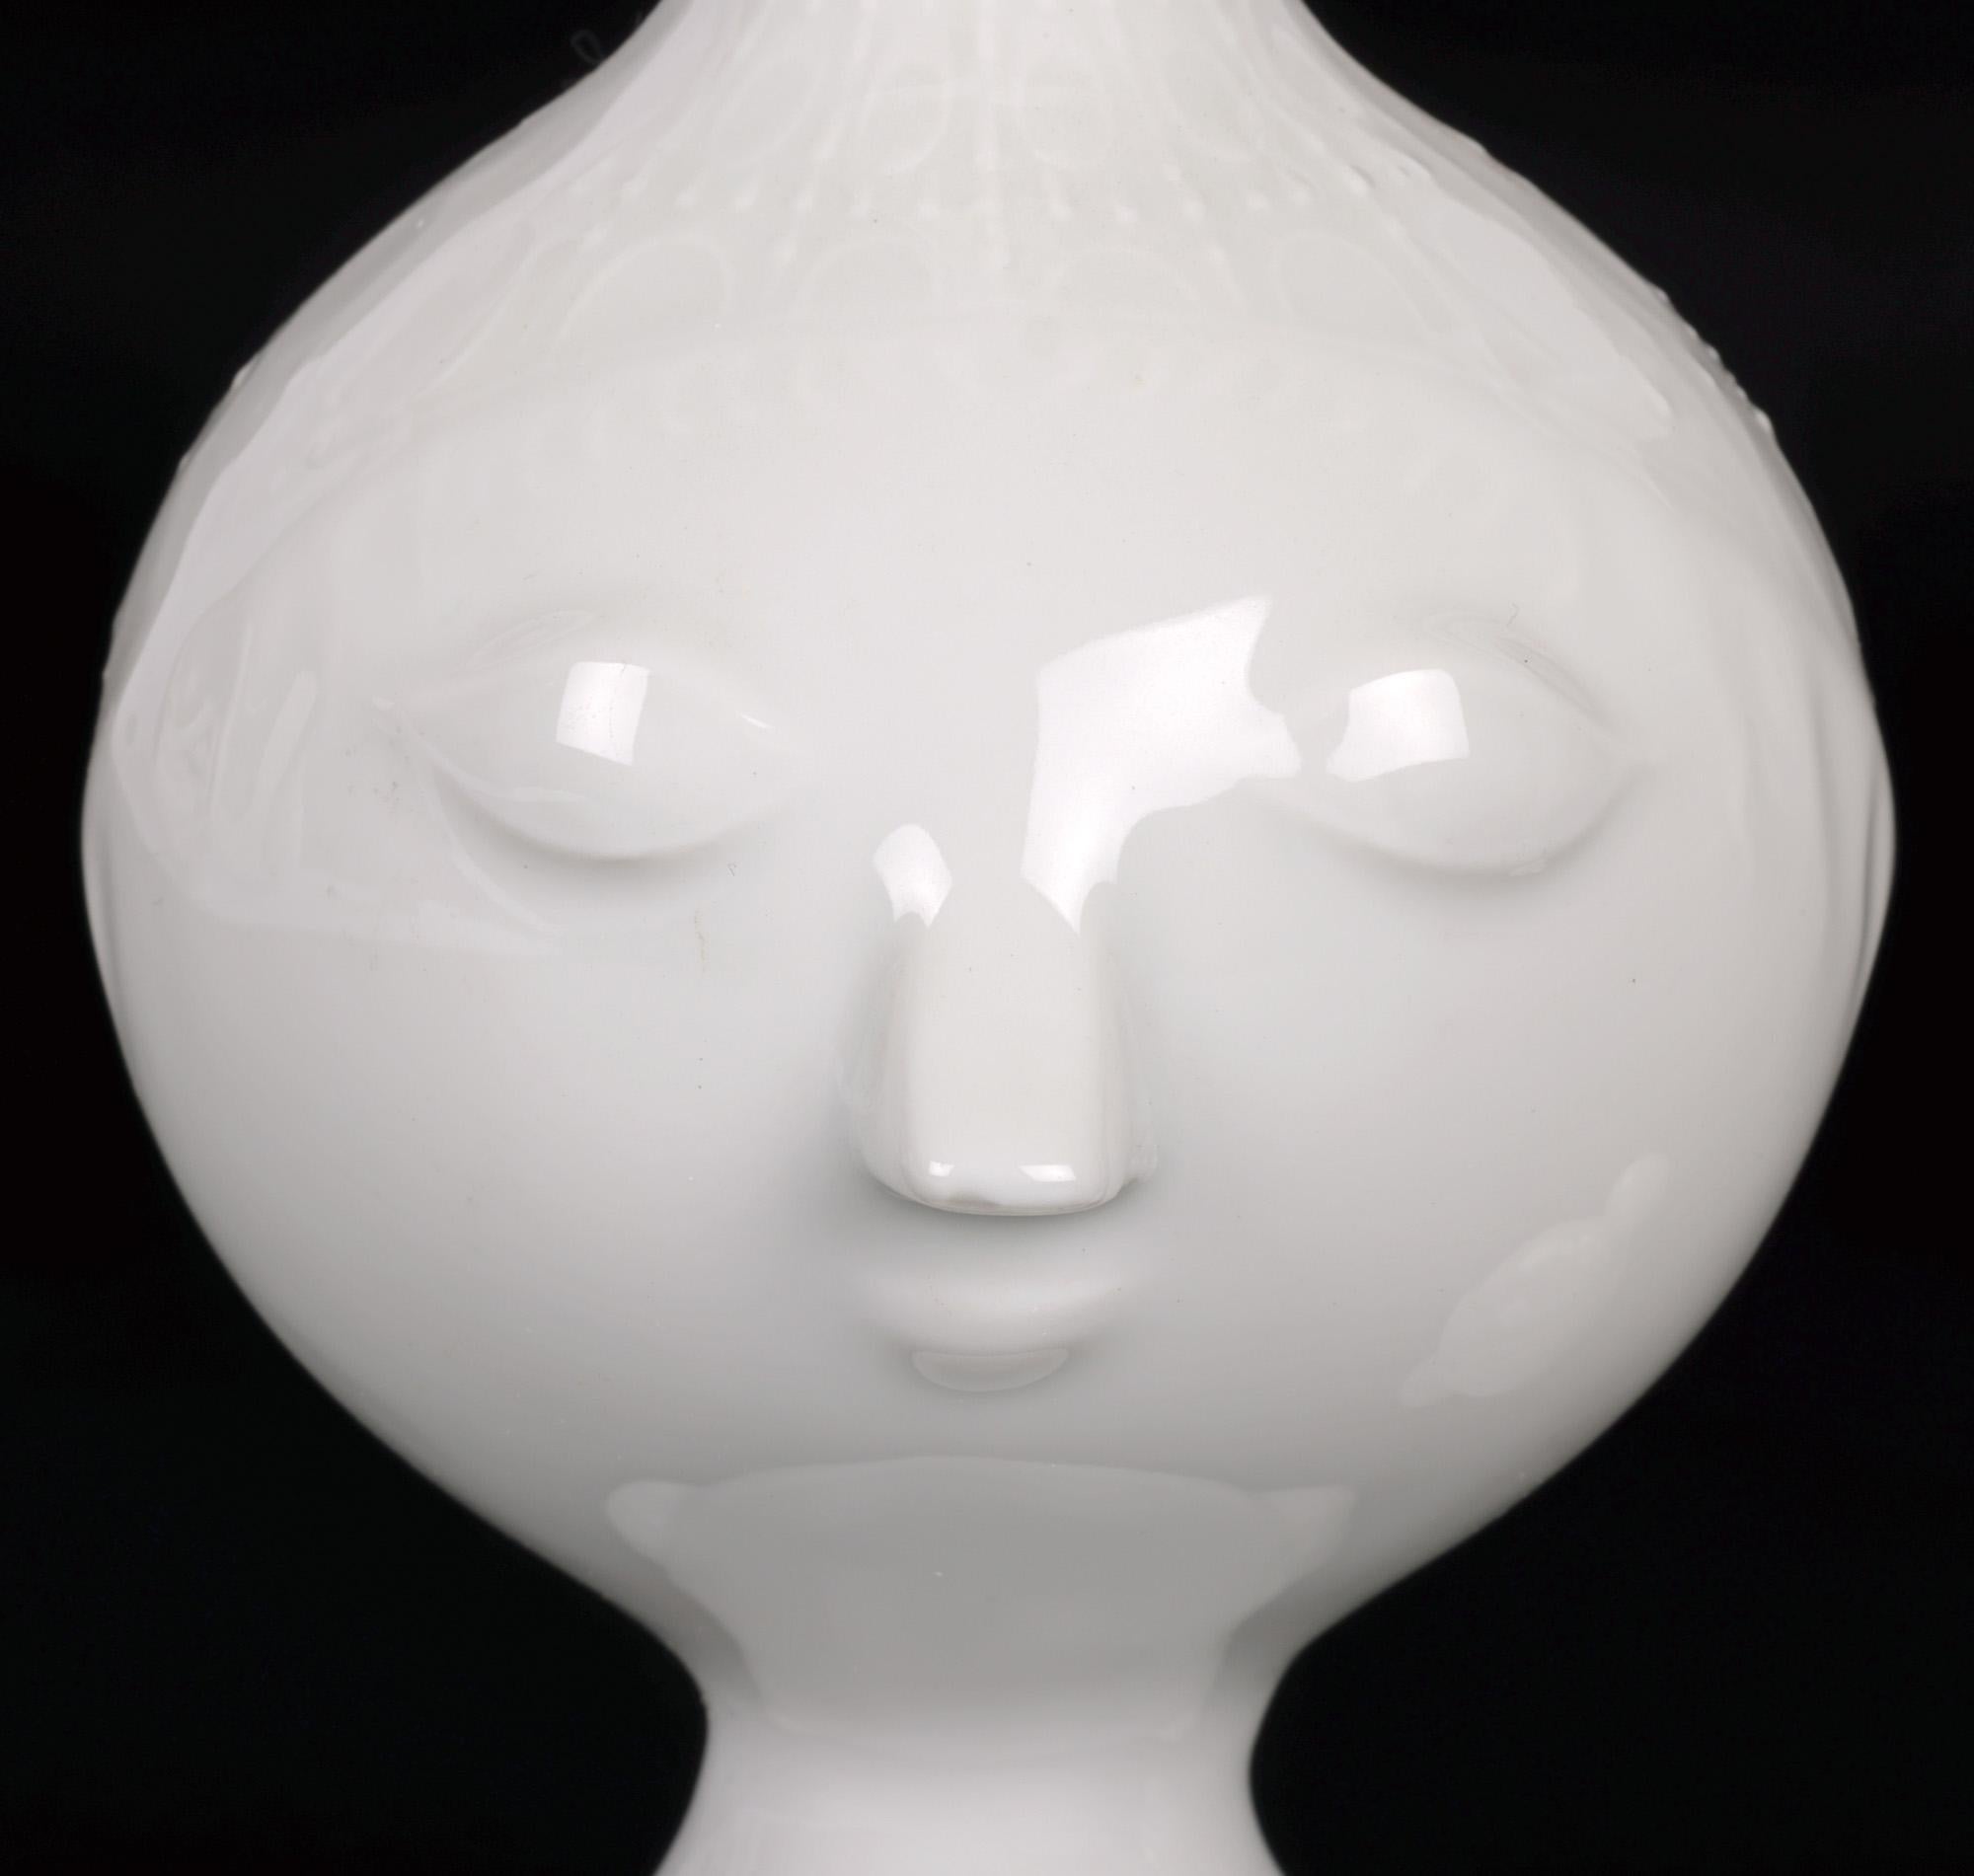 A very stylish example of this charming midcentury Rosenthal porcelain lidded jug modelled as the bust of a young girl by renowned Danish born artist Bjorn Wiinblad (1918-2006). This finely made white porcelain jug has a body of rounded shape